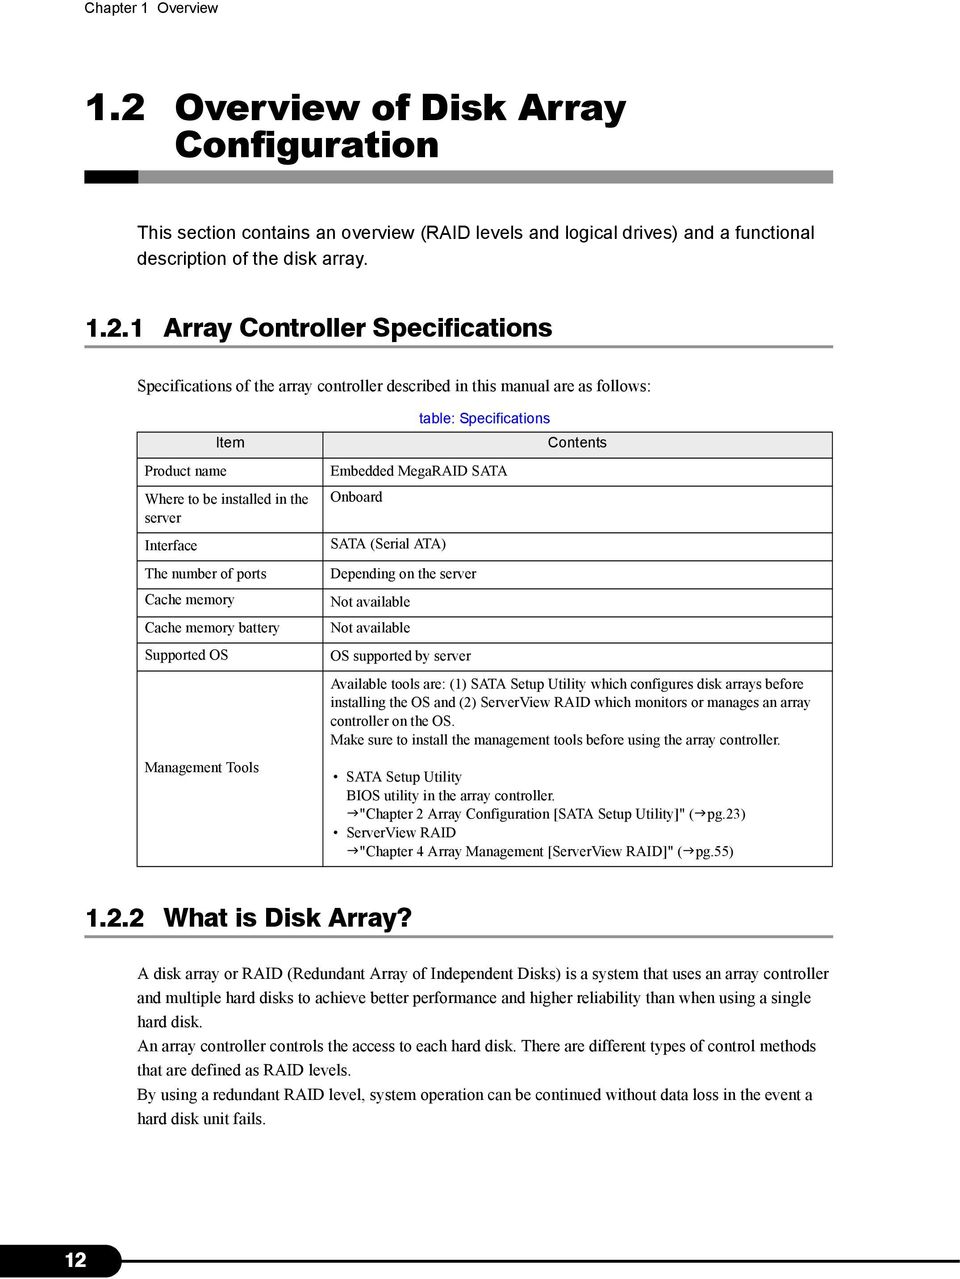 1 Array Controller Specifications Specifications of the array controller described in this manual are as follows: Item Product name Where to be installed in the server Interface The number of ports